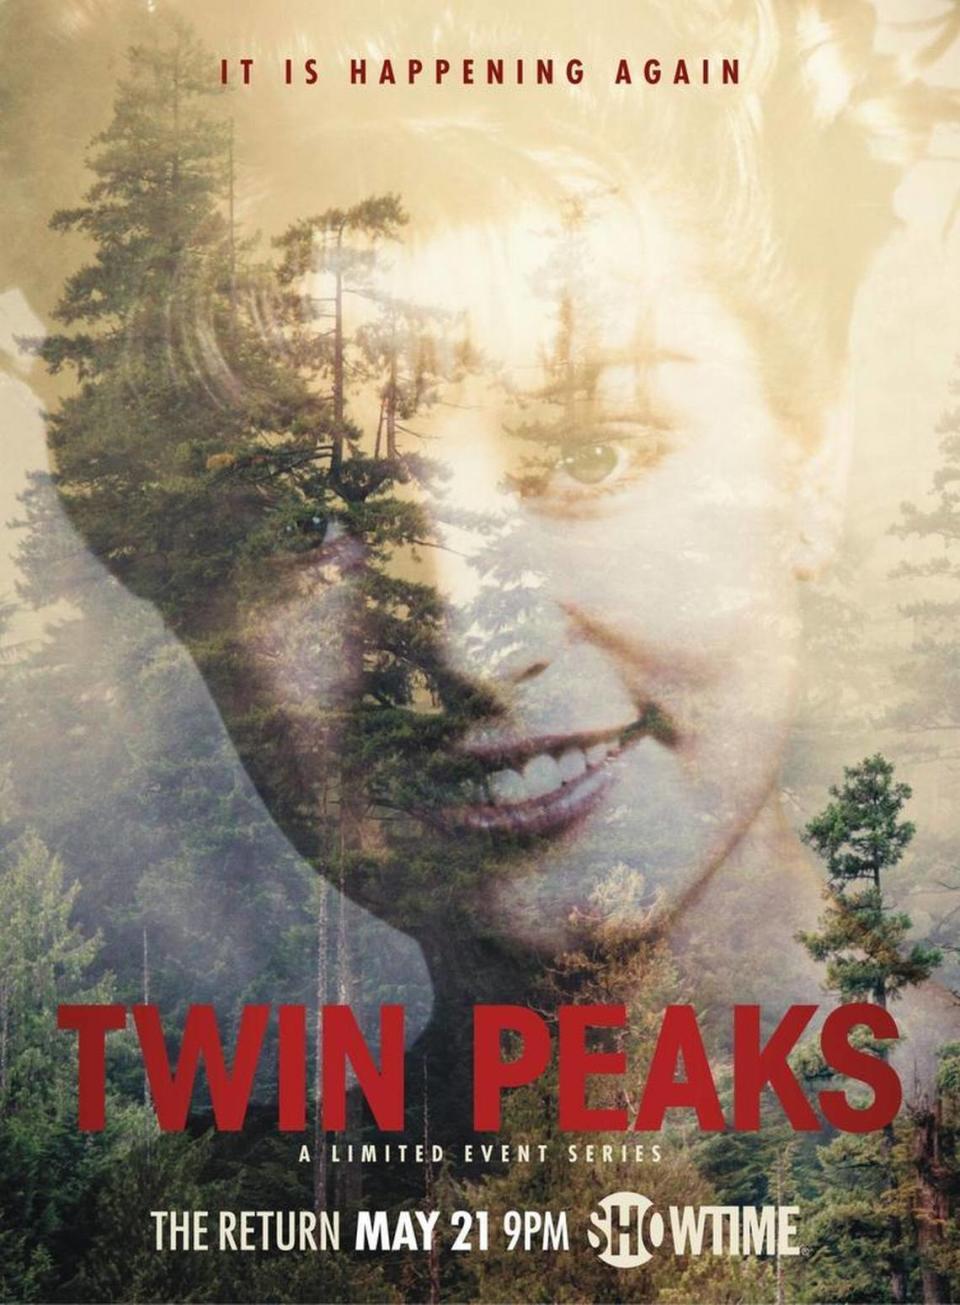 This is one of the two posters that have been released for the new “Twin Peaks.”